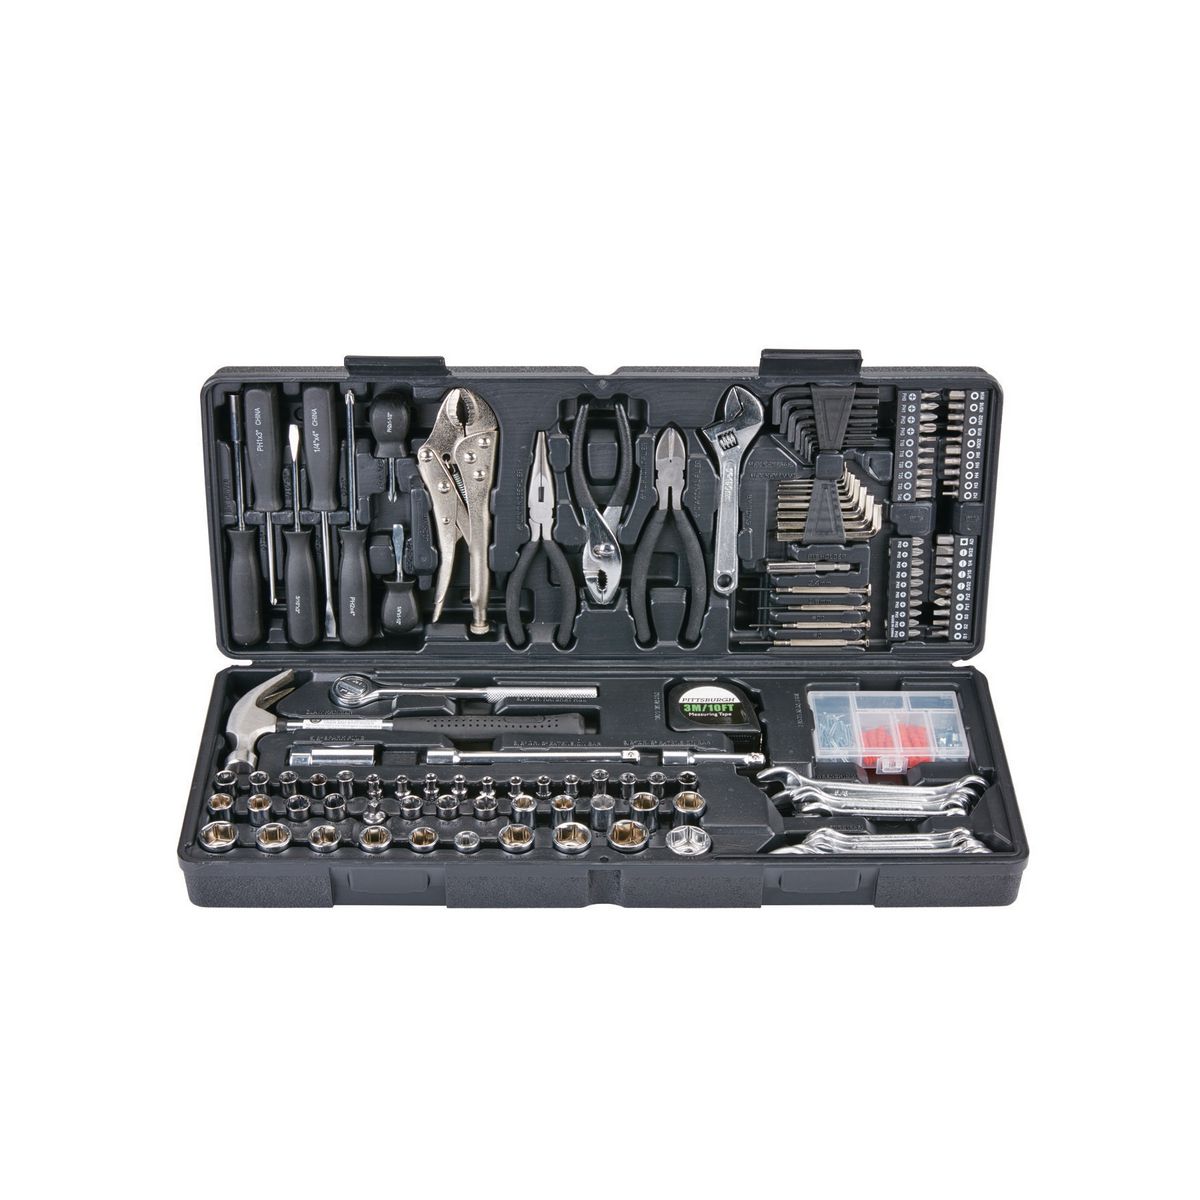 PITTSBURGH® 130 Pc Tool Kit With Case - Item 63248 / 68998 / 69331 / 63091 / 64263